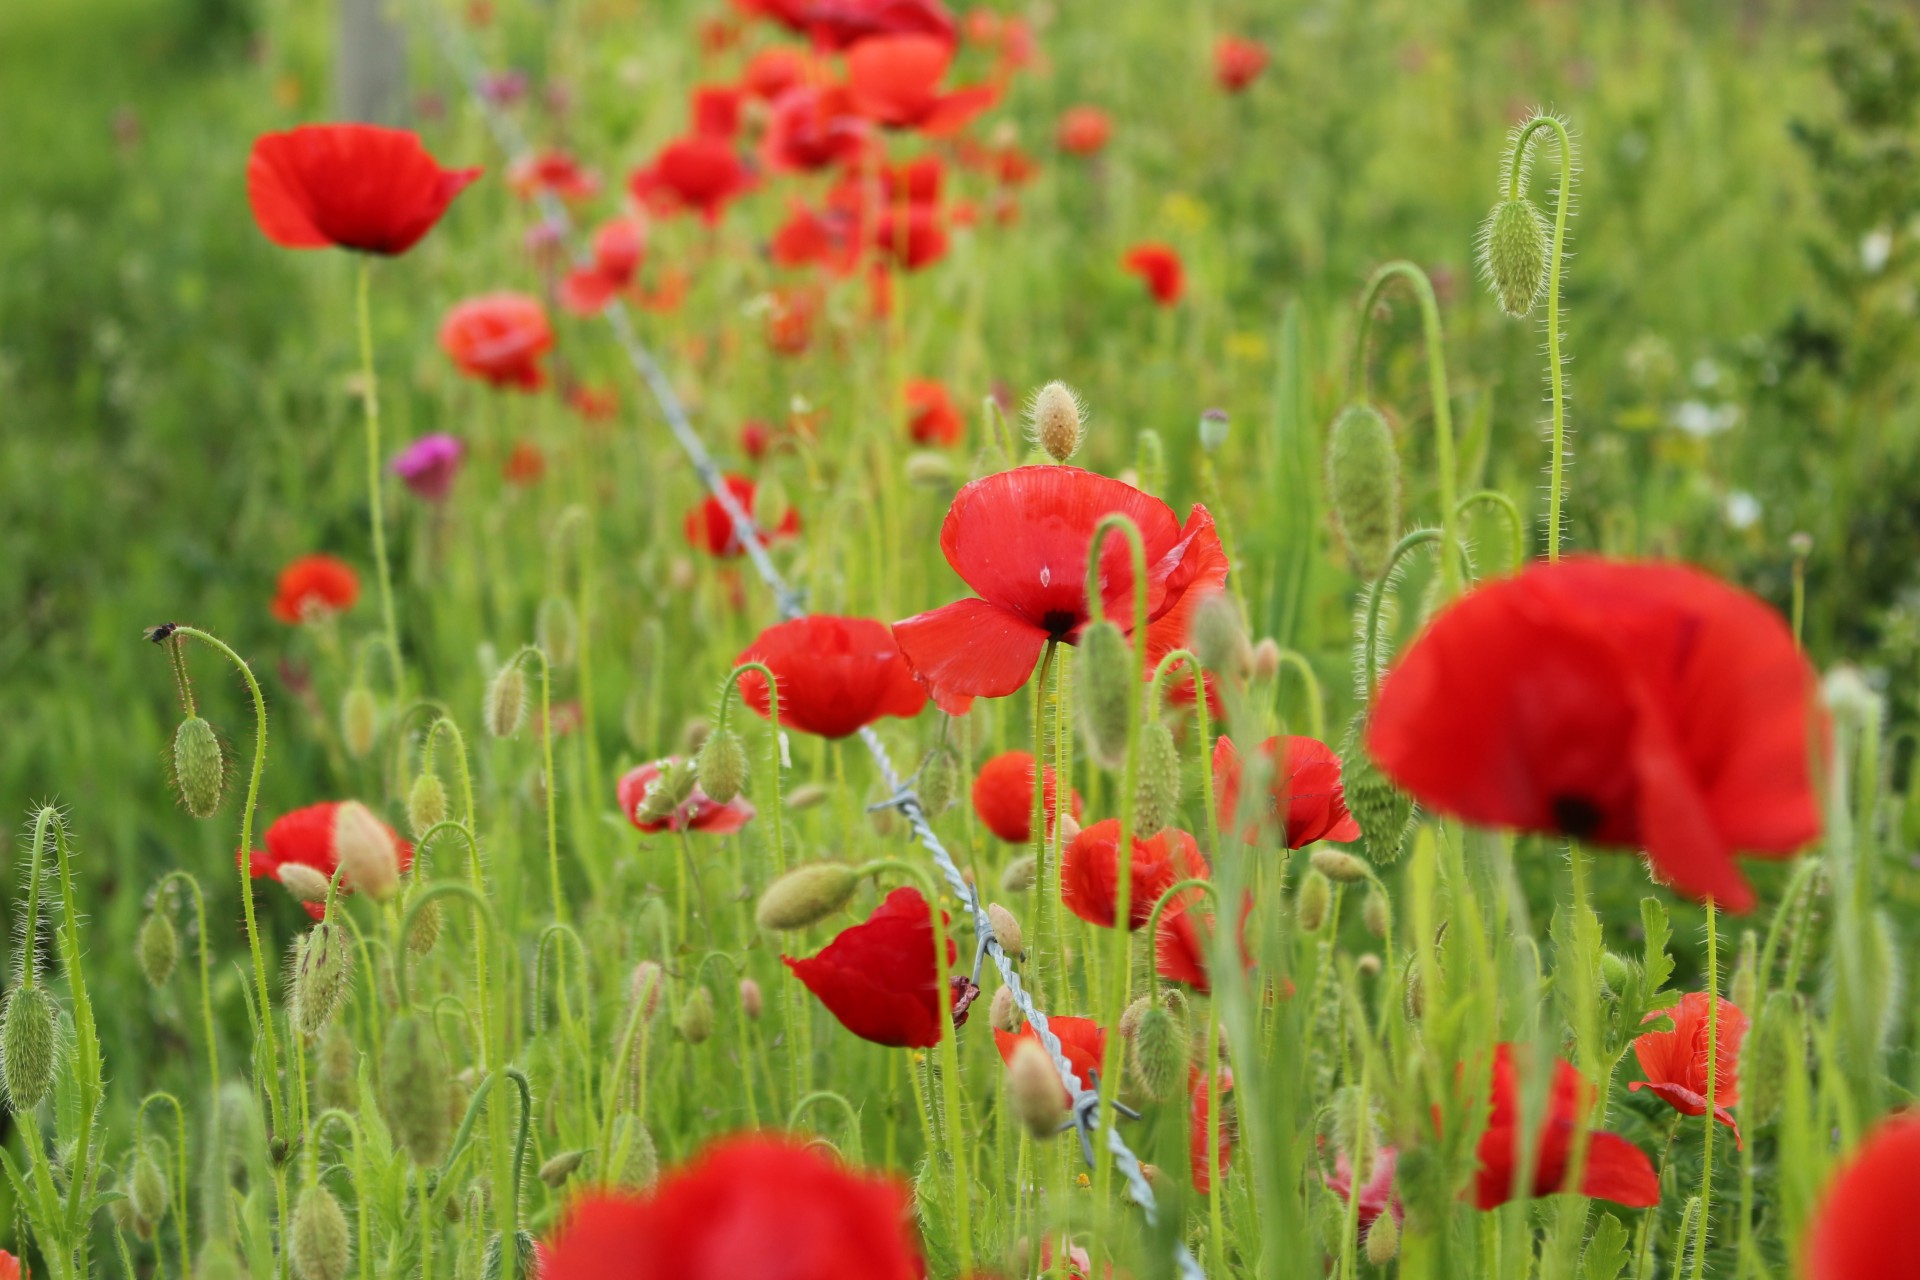 Colorful Wild Flowers Red Poppies